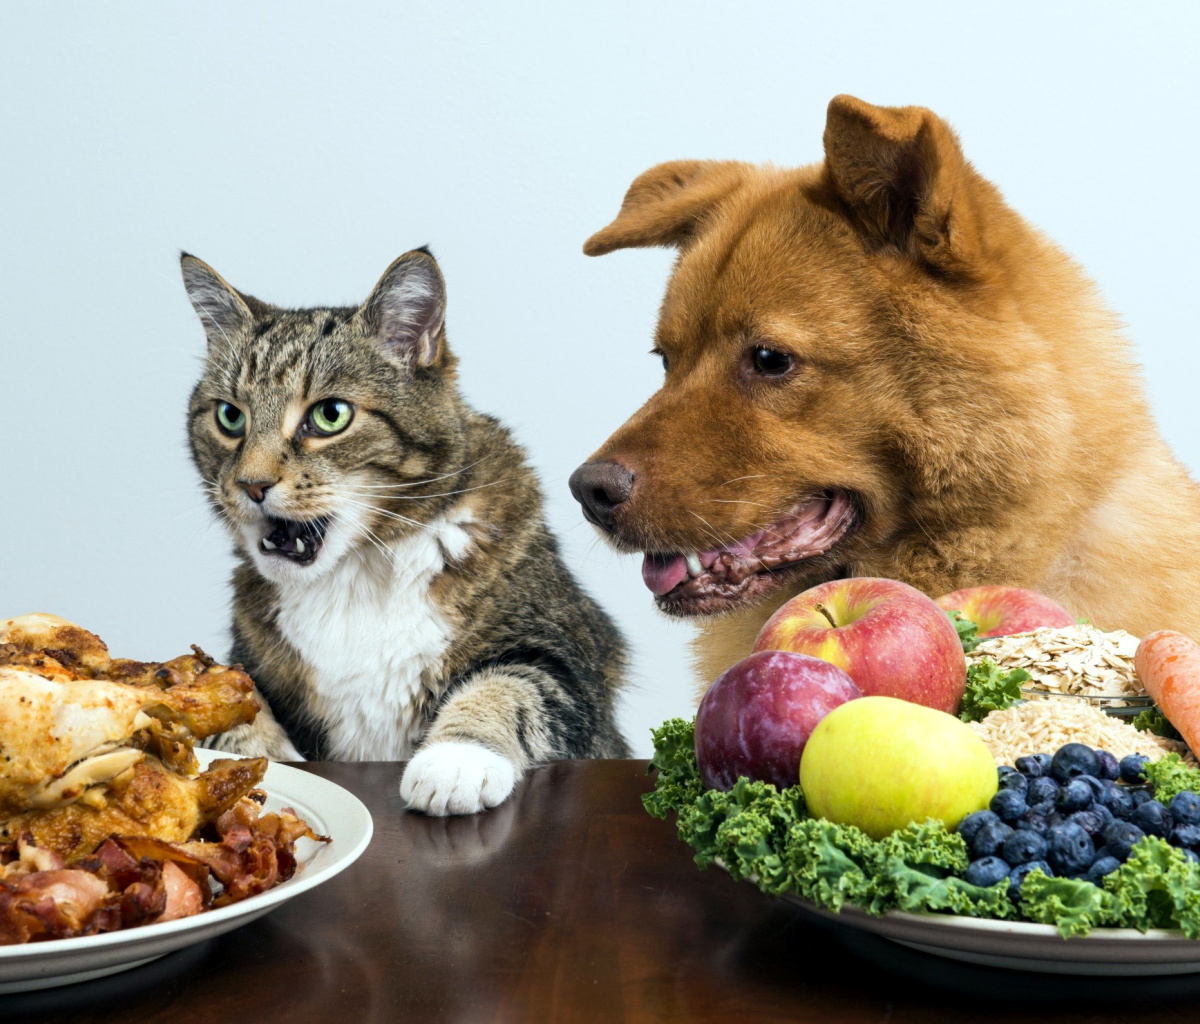 Dog and Cat Dinner wallpaper 1200x1024